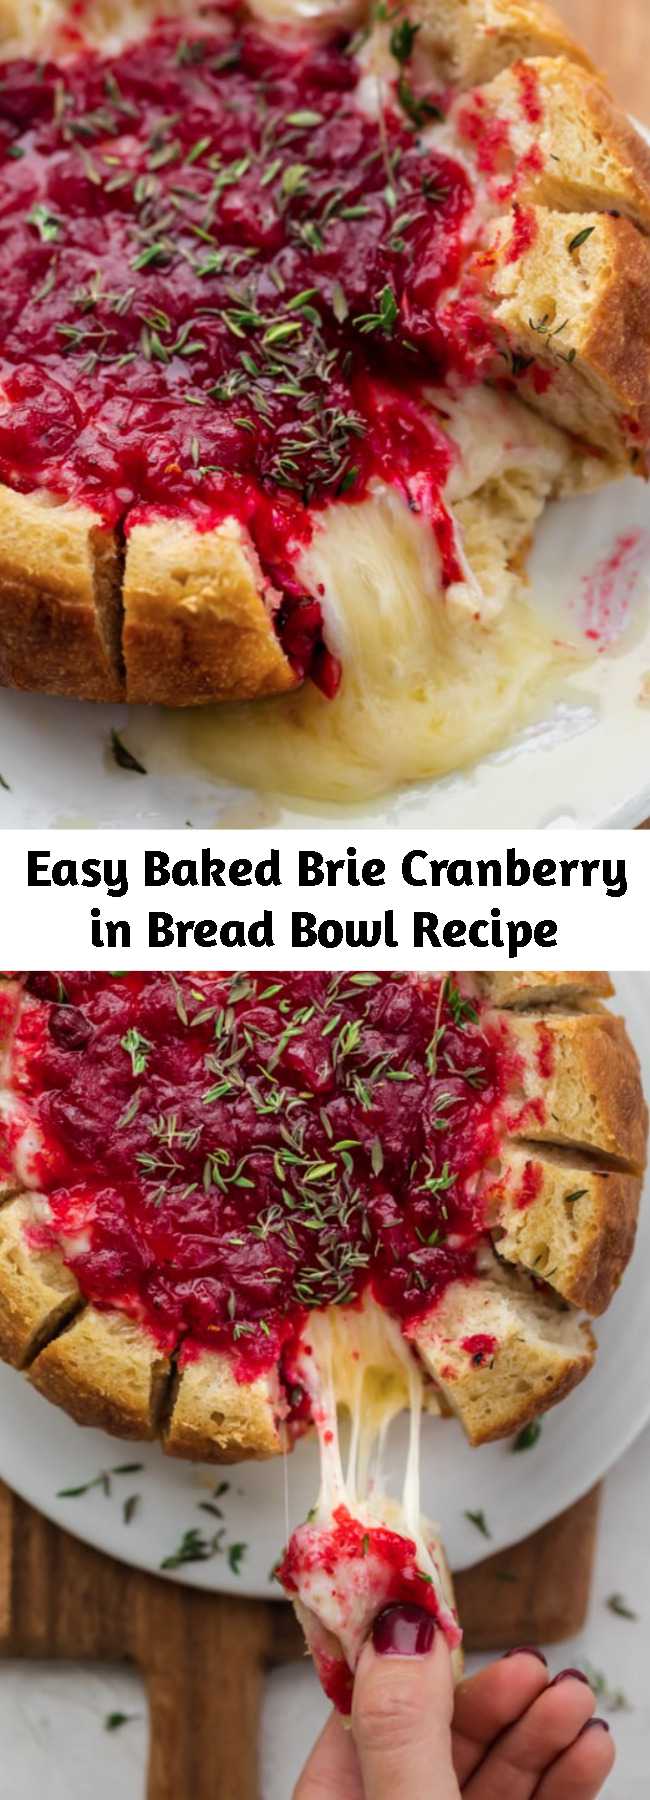 Easy Baked Brie Cranberry in Bread Bowl Recipe - For your Thanksgiving, Christmas and any holiday parties, try this elegant easy 3 ingredient baked brie cranberry, served in a pull-apart bread bowl for dipping! This crowd pleasing festive appetizer is perfect for entertaining and so easy to make! #Thanksgiving #Christmas